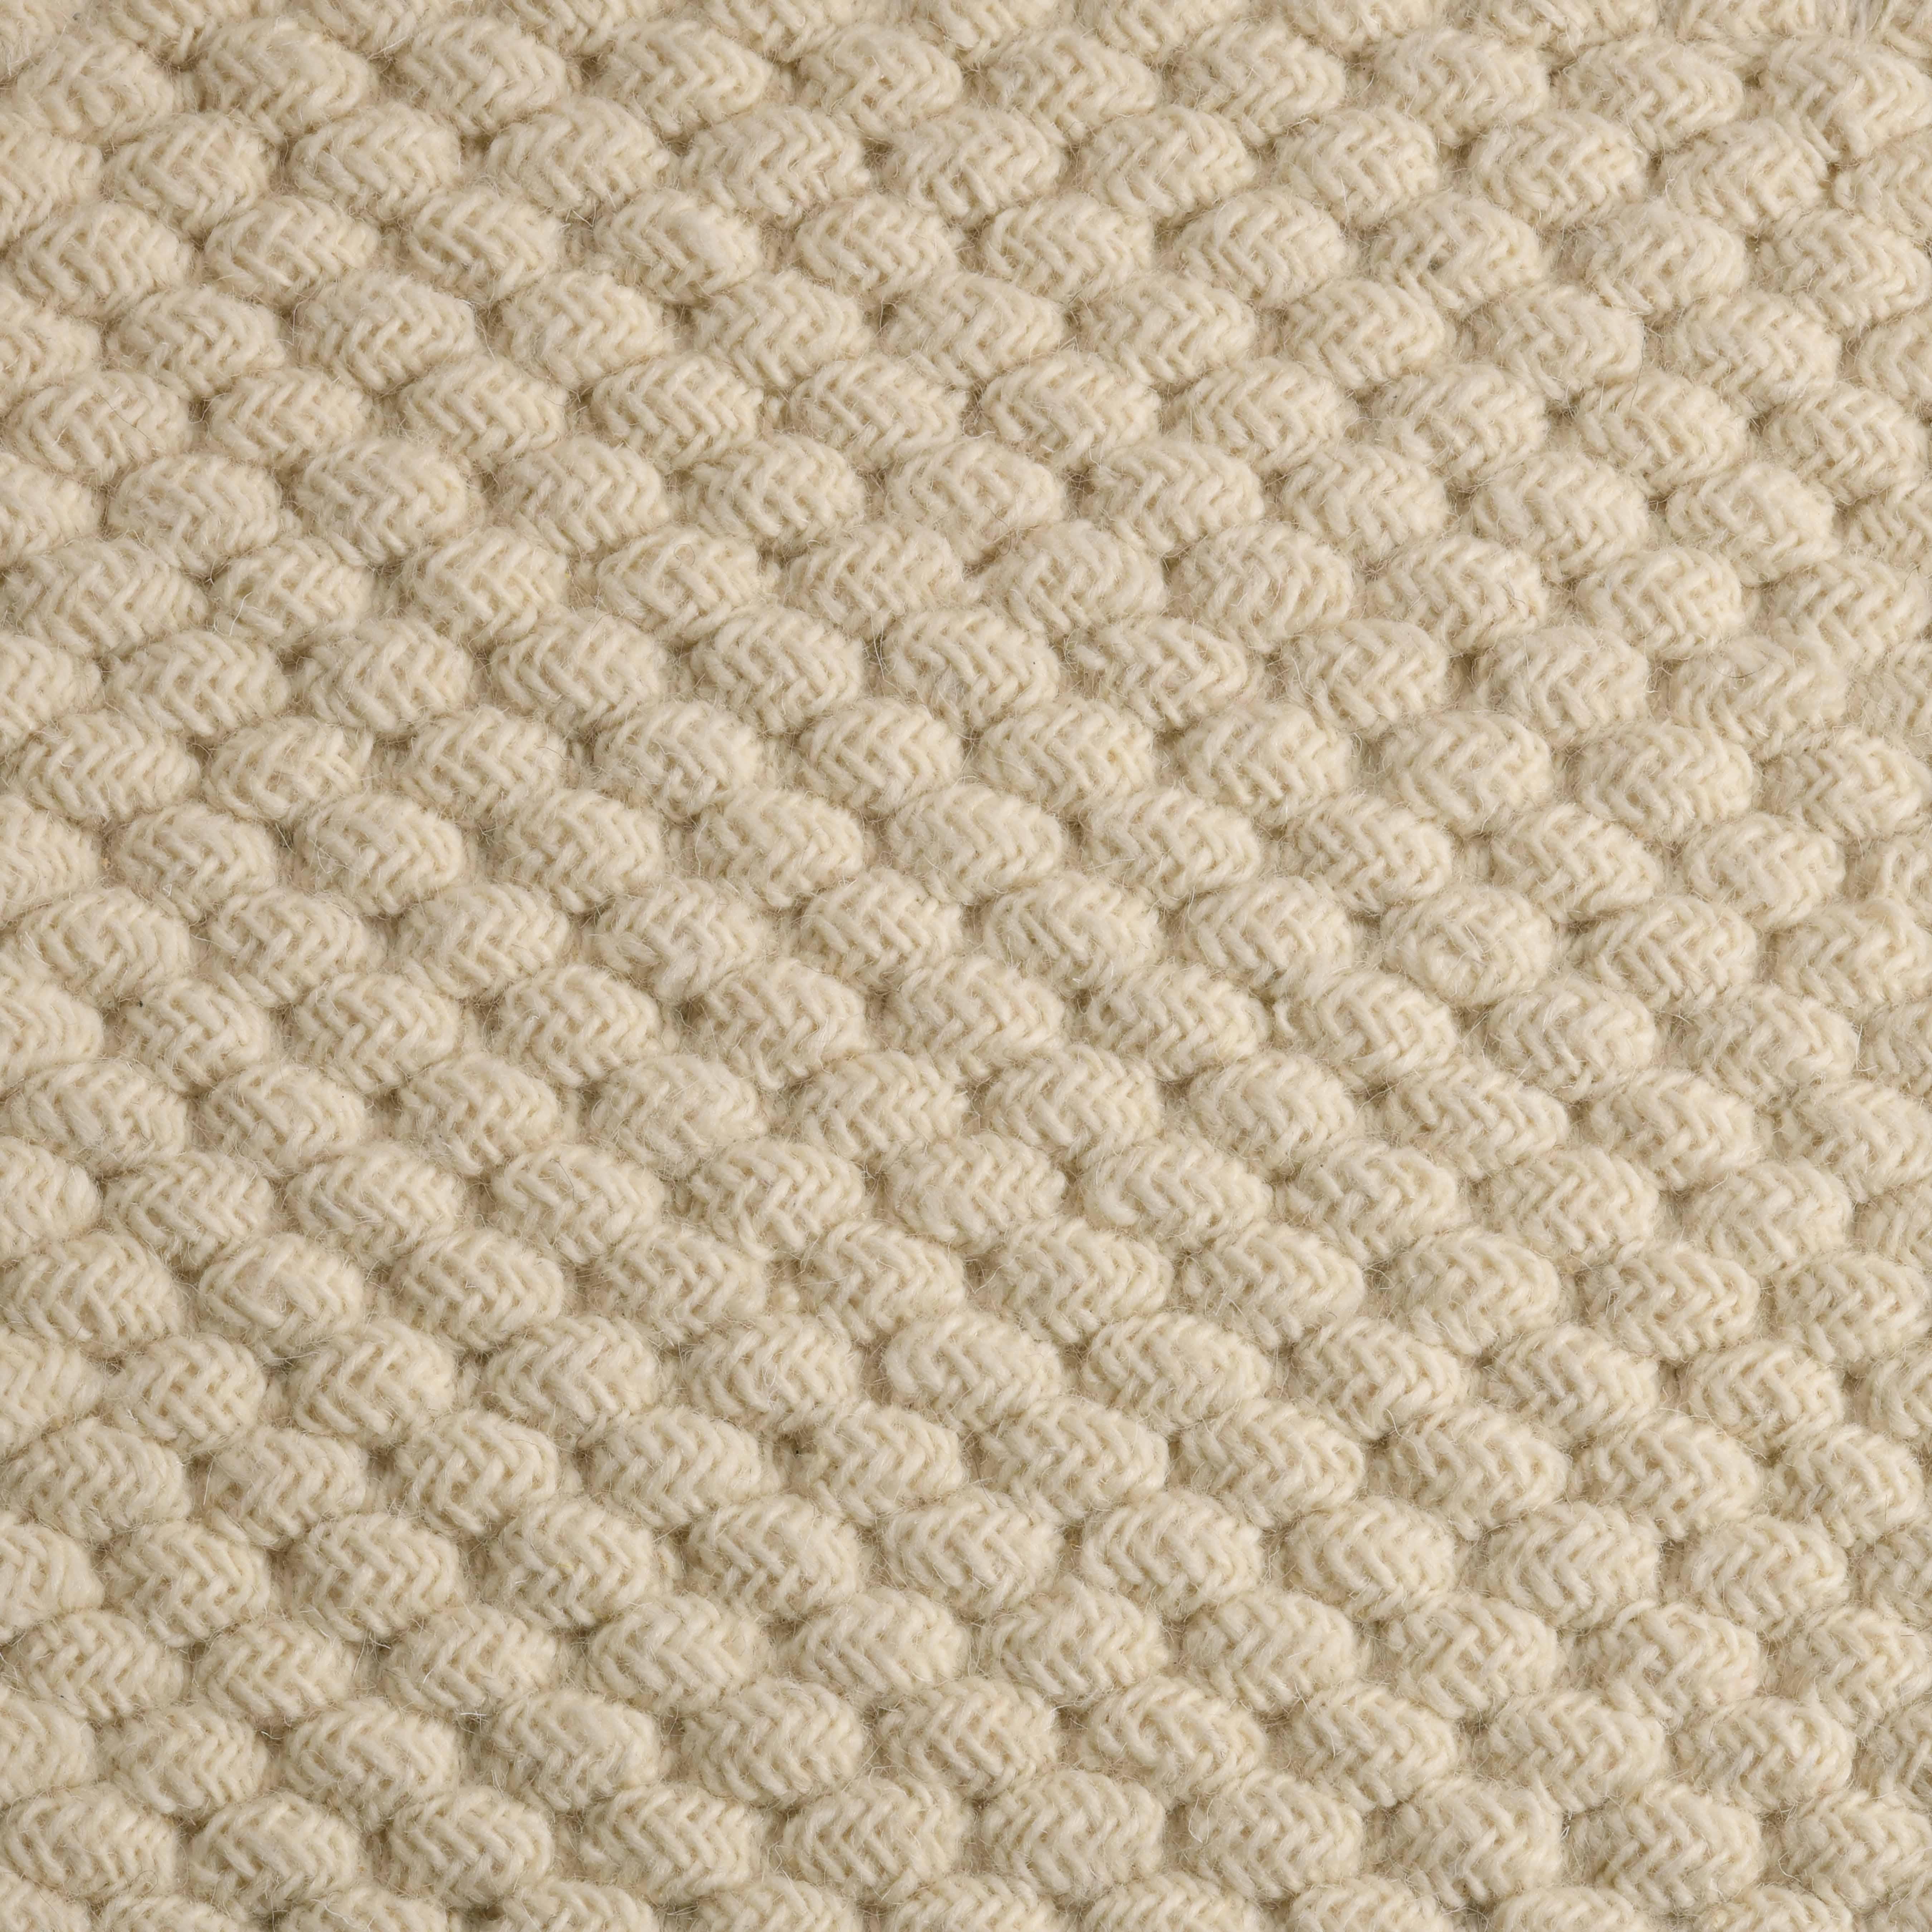 Acia, Ivory, Handwoven Face: 60% Undyed NZ Wool, 40% Undyed MED Wool, 8' x 10'